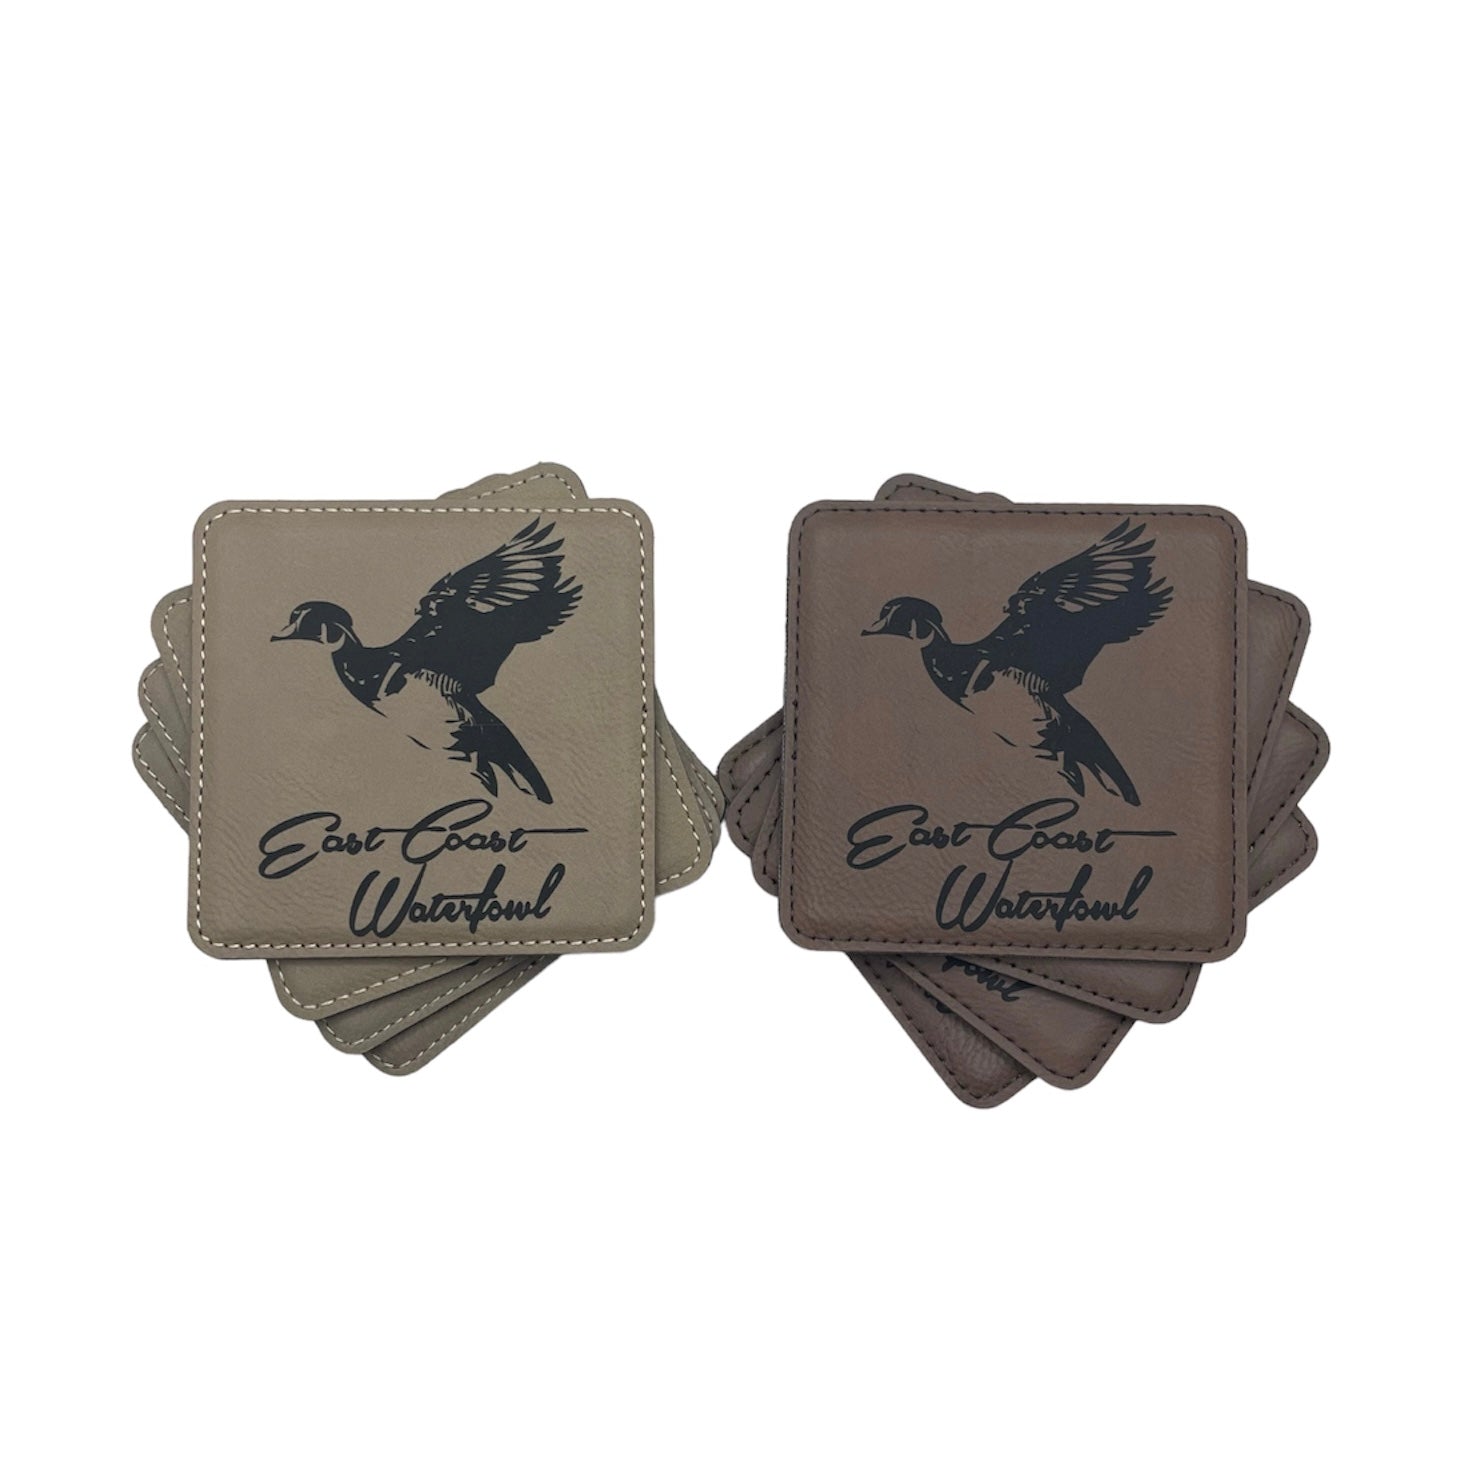 Square drink coasters with ECW logo and duck